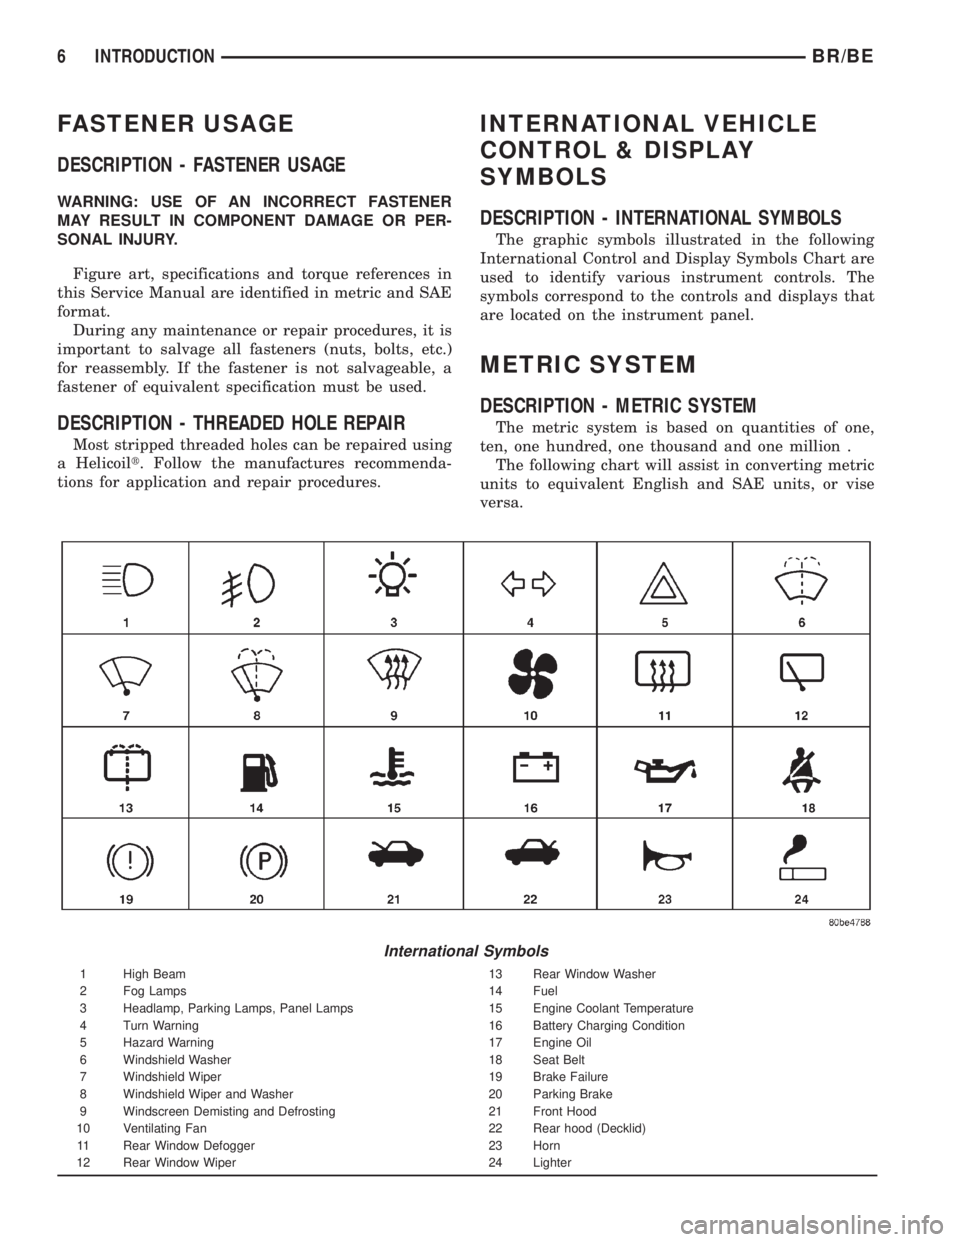 DODGE RAM 2001  Service Repair Manual FASTENER USAGE
DESCRIPTION - FASTENER USAGE
WARNING: USE OF AN INCORRECT FASTENER
MAY RESULT IN COMPONENT DAMAGE OR PER-
SONAL INJURY.
Figure art, specifications and torque references in
this Service 